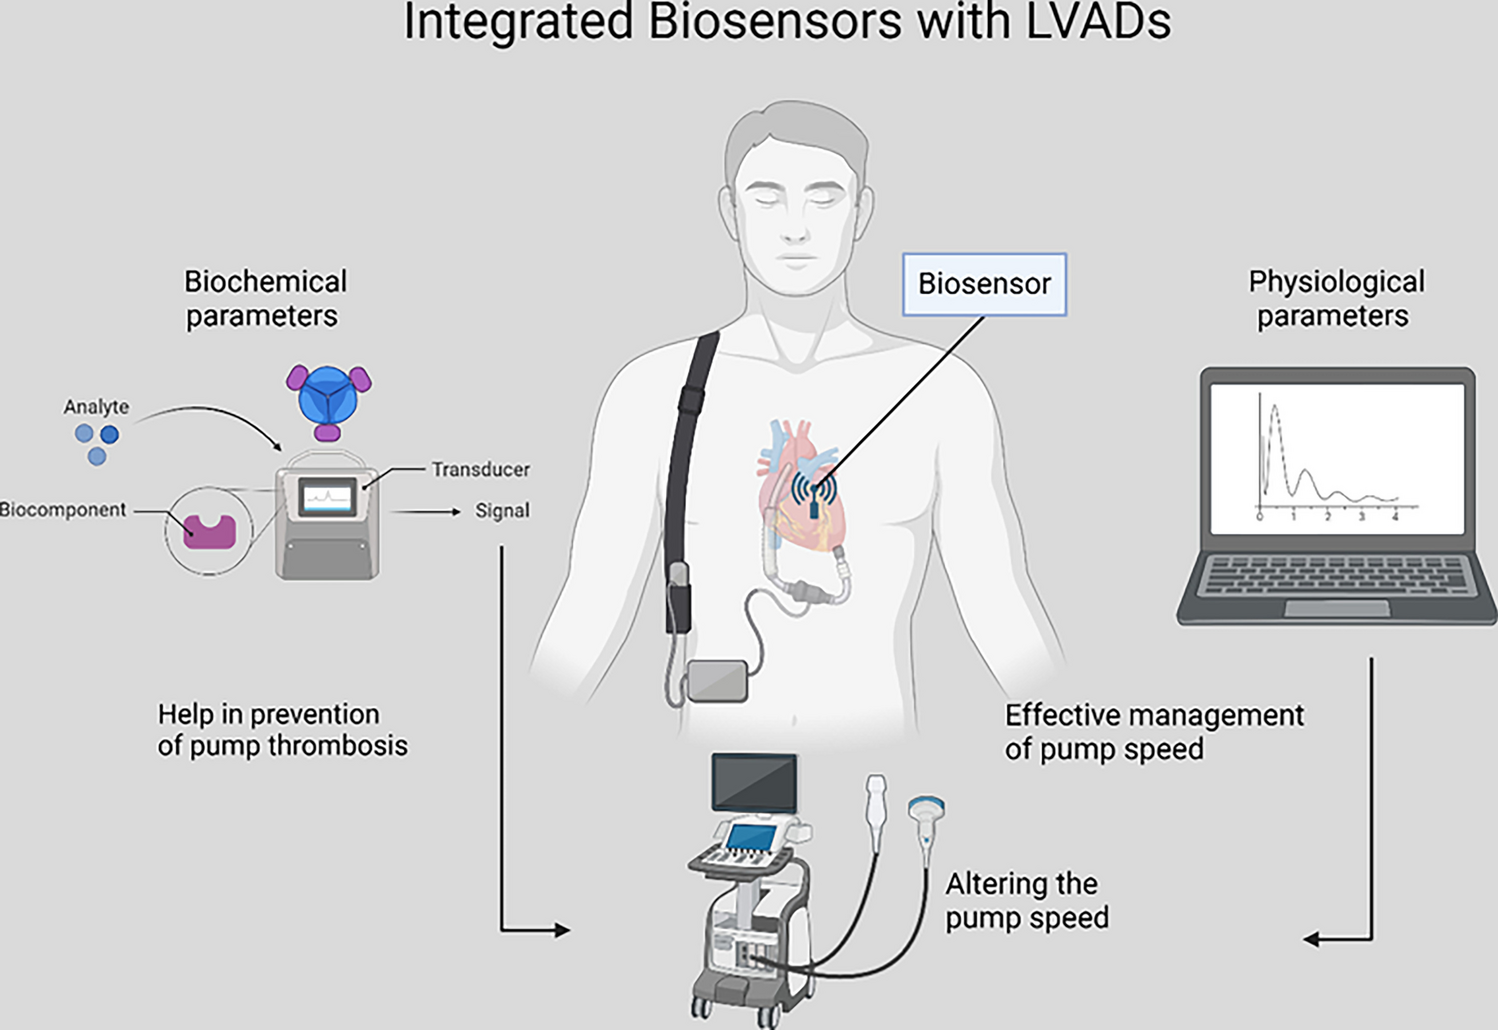 Biosensors with left ventricular assist devices